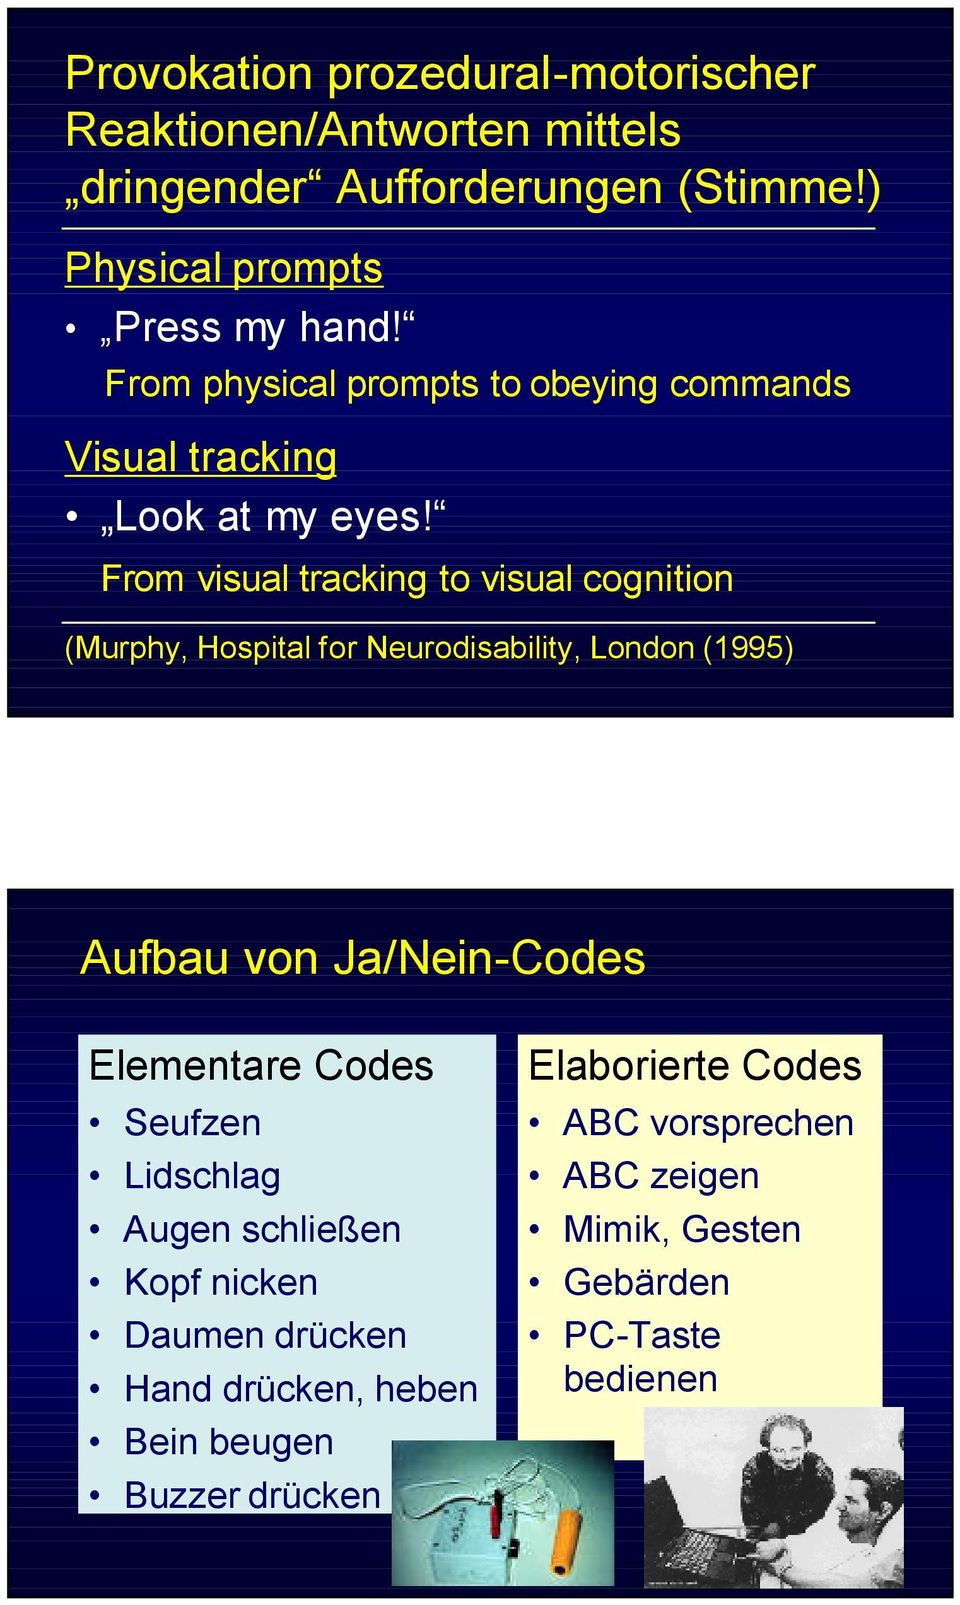 From visual tracking to visual cognition (Murphy, Hospital for Neurodisability, London (1995) Aufbau von Ja/Nein-Codes Elementare